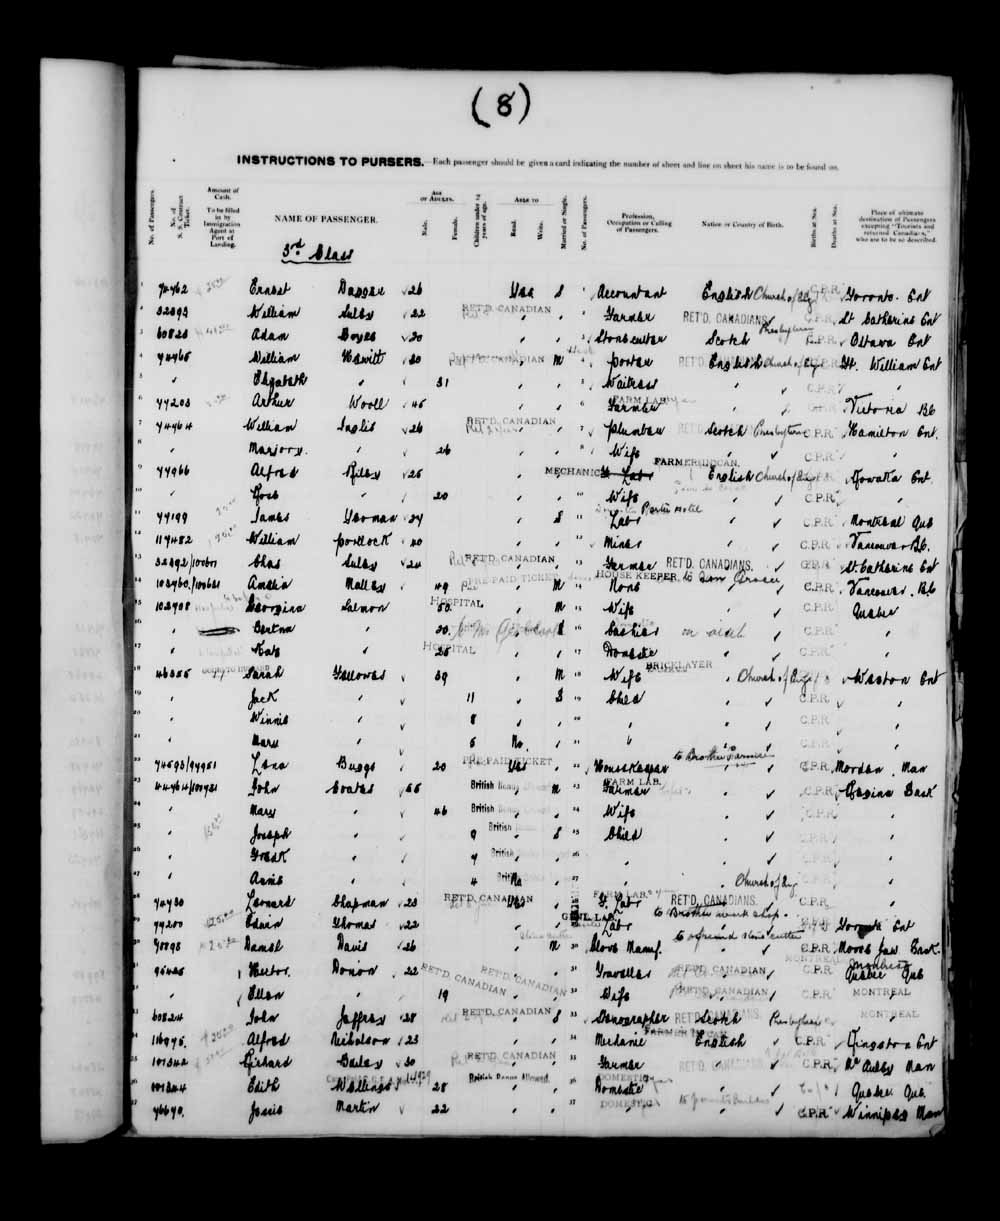 Digitized page of Quebec Passenger Lists for Image No.: e003591258